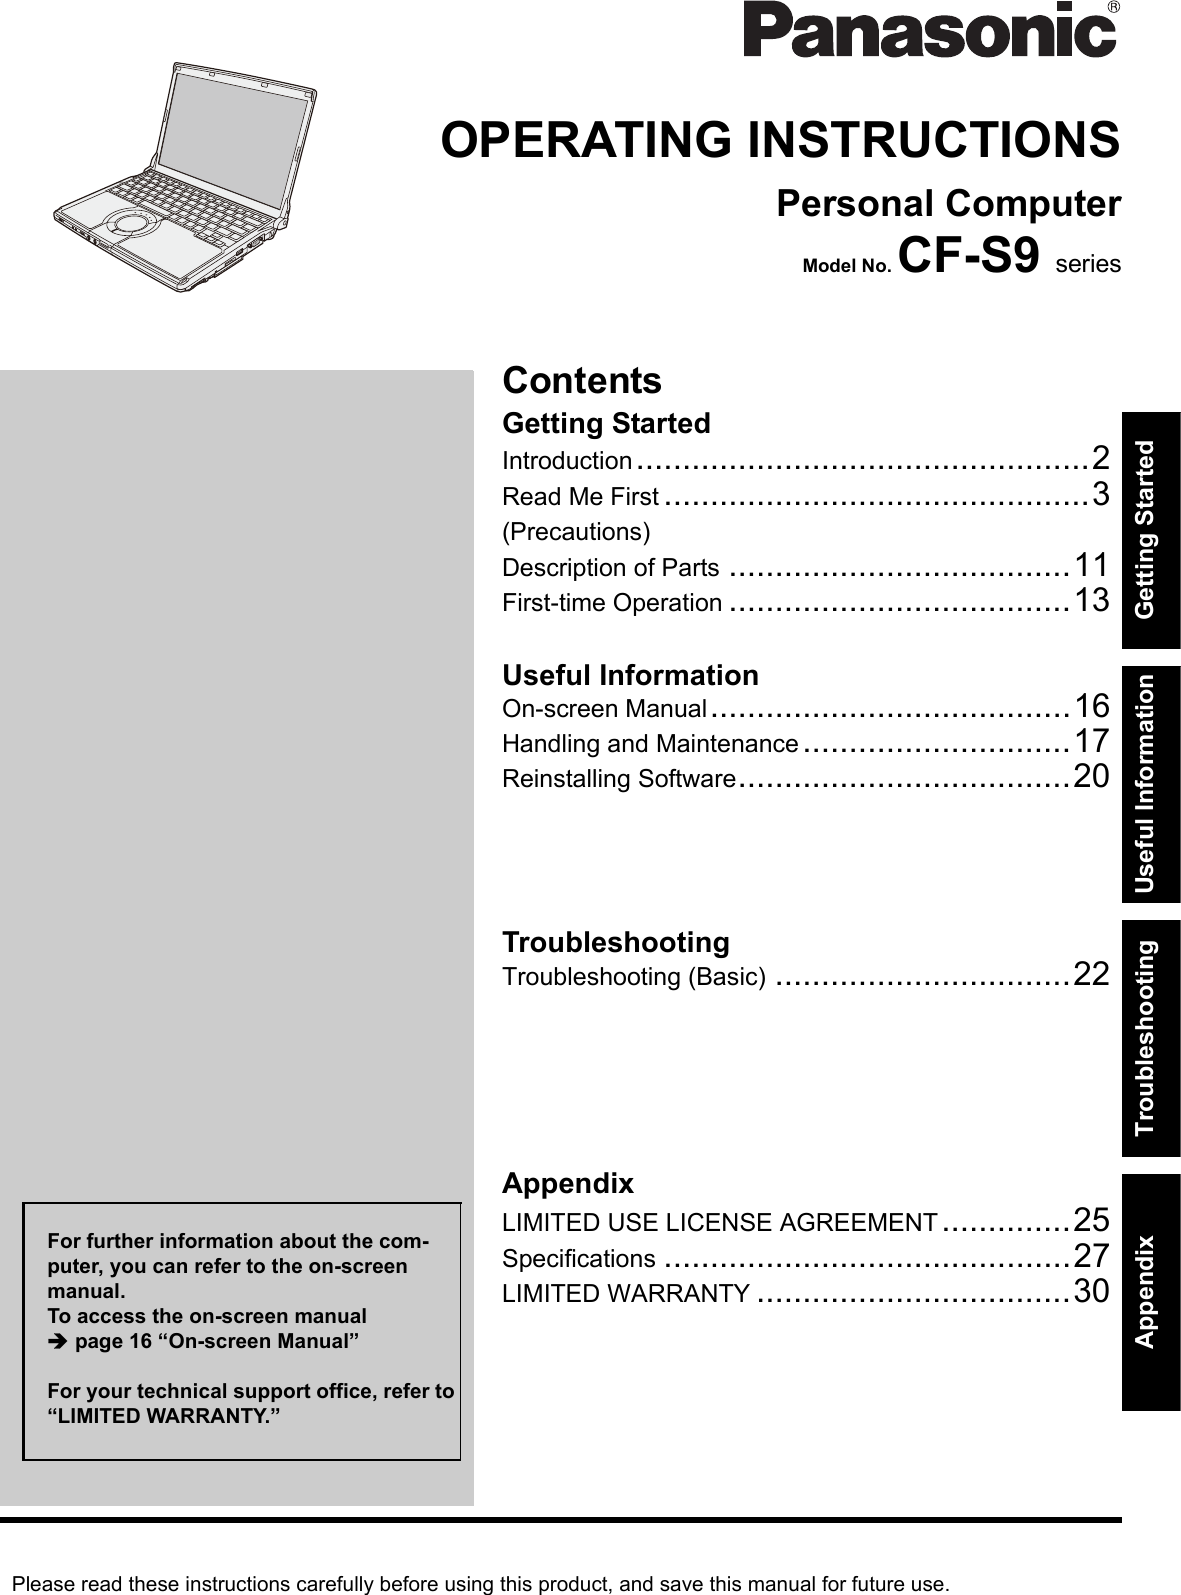 Please read these instructions carefully before using this product, and save this manual for future use.ContentsGetting StartedUseful InformationTroubleshootingGetting StartedUseful InformationTroubleshootingAppendixAppendixOPERATING INSTRUCTIONSPersonal ComputerModel No. CF-S9 seriesIntroduction.................................................2Read Me First ..............................................3(Precautions)Description of Parts .....................................11First-time Operation .....................................13On-screen Manual.......................................16Handling and Maintenance.............................17Reinstalling Software....................................20Troubleshooting (Basic) ................................22LIMITED USE LICENSE AGREEMENT..............25Specifications ............................................27LIMITED WARRANTY ..................................30For further information about the com-puter, you can refer to the on-screen manual.To access the on-screen manual Îpage 16 “On-screen Manual”For your technical support office, refer to “LIMITED WARRANTY.”